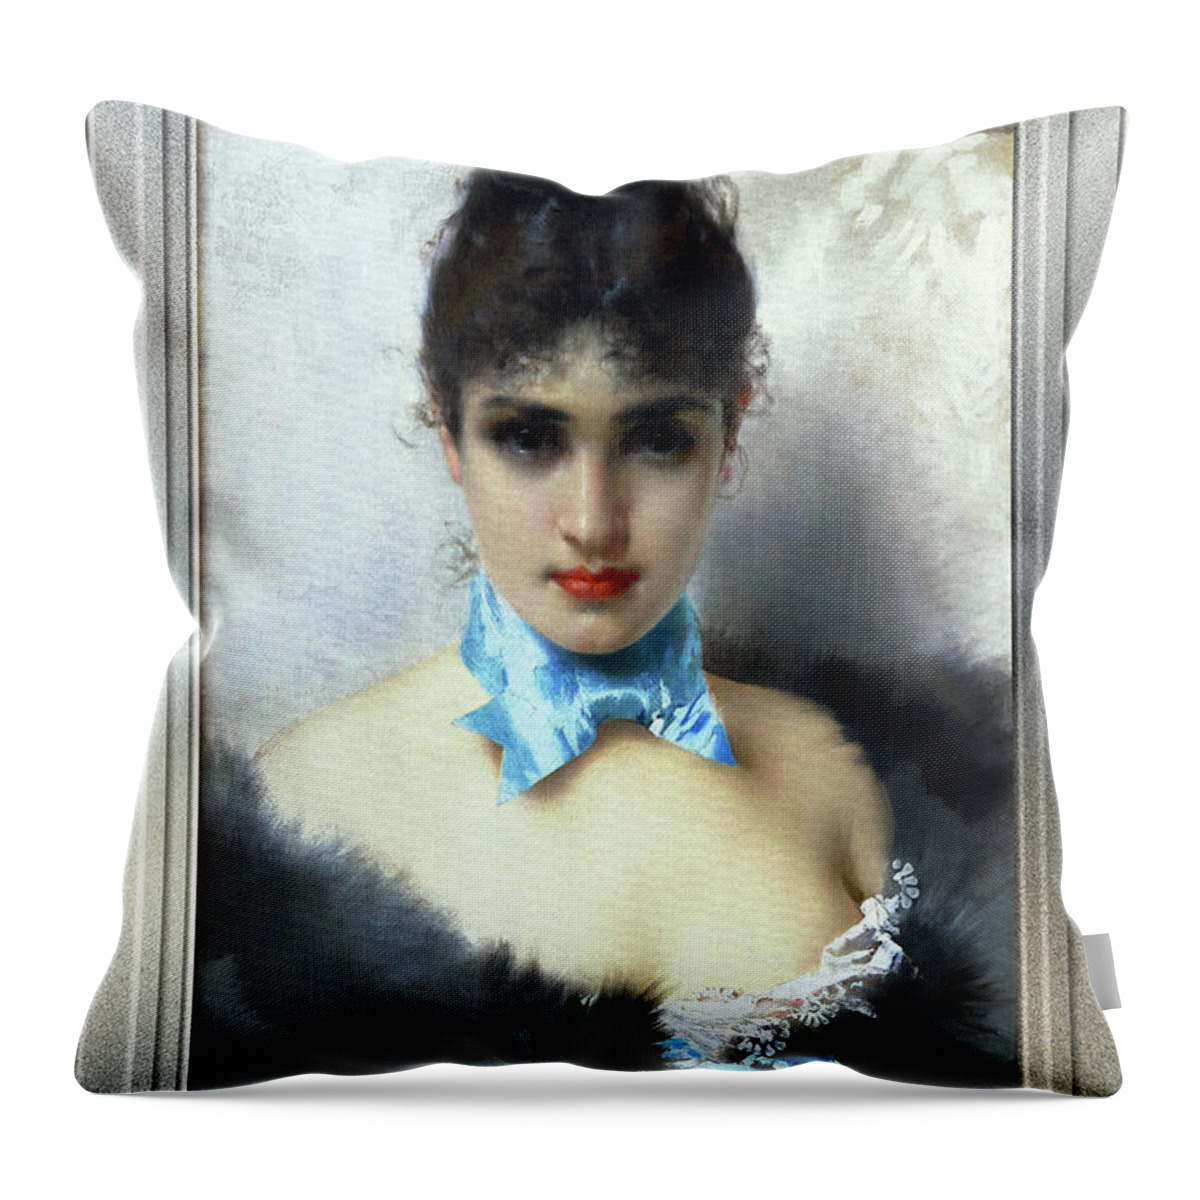 Portrait Of An Elegant Woman Throw Pillow featuring the painting Ritratto Di Donna Elegante by Vittorio Matteo Corcos Classical Art Old Masters Reproduction by Rolando Burbon